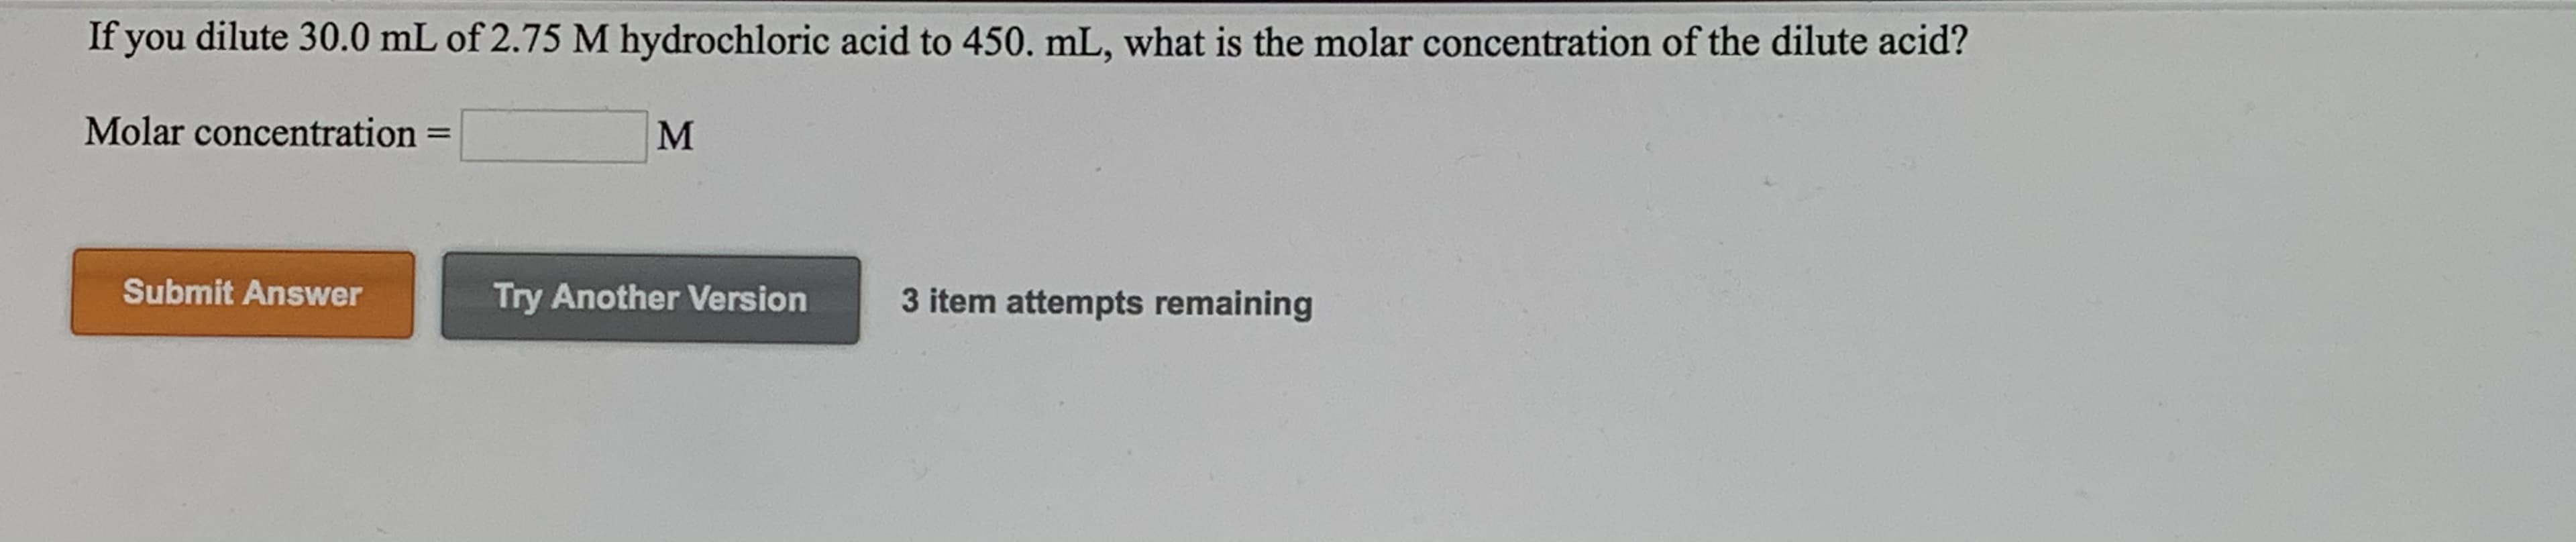 If you dilute 30.0 mL of 2.75 M hydrochloric acid to 450. mL, what is the molar concentration of the dilute acid?
Molar concentration
